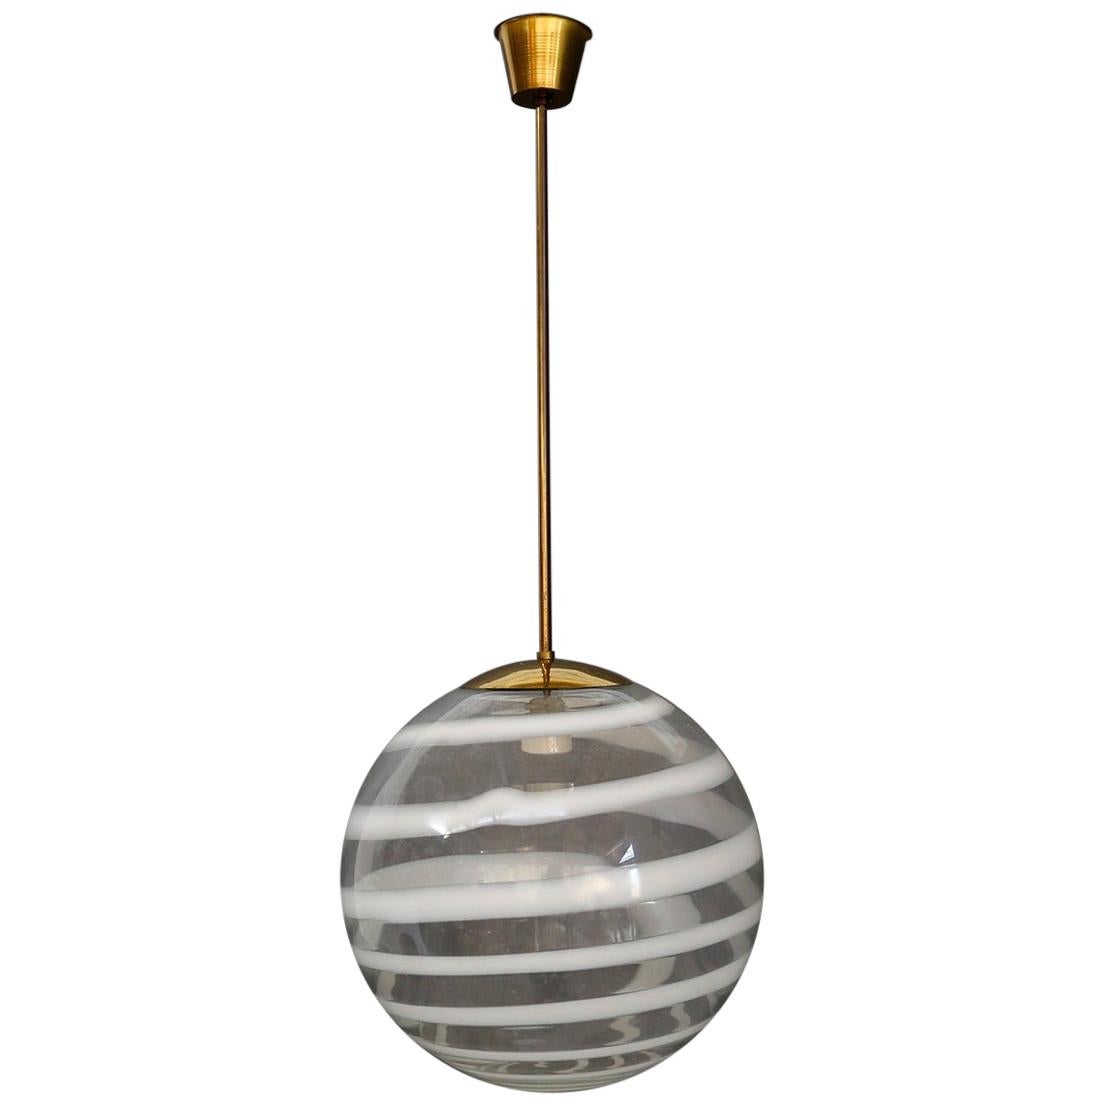 Carlo Scarpa for Venini Pendant Midcentury in Brass and Glass, Published 1950s